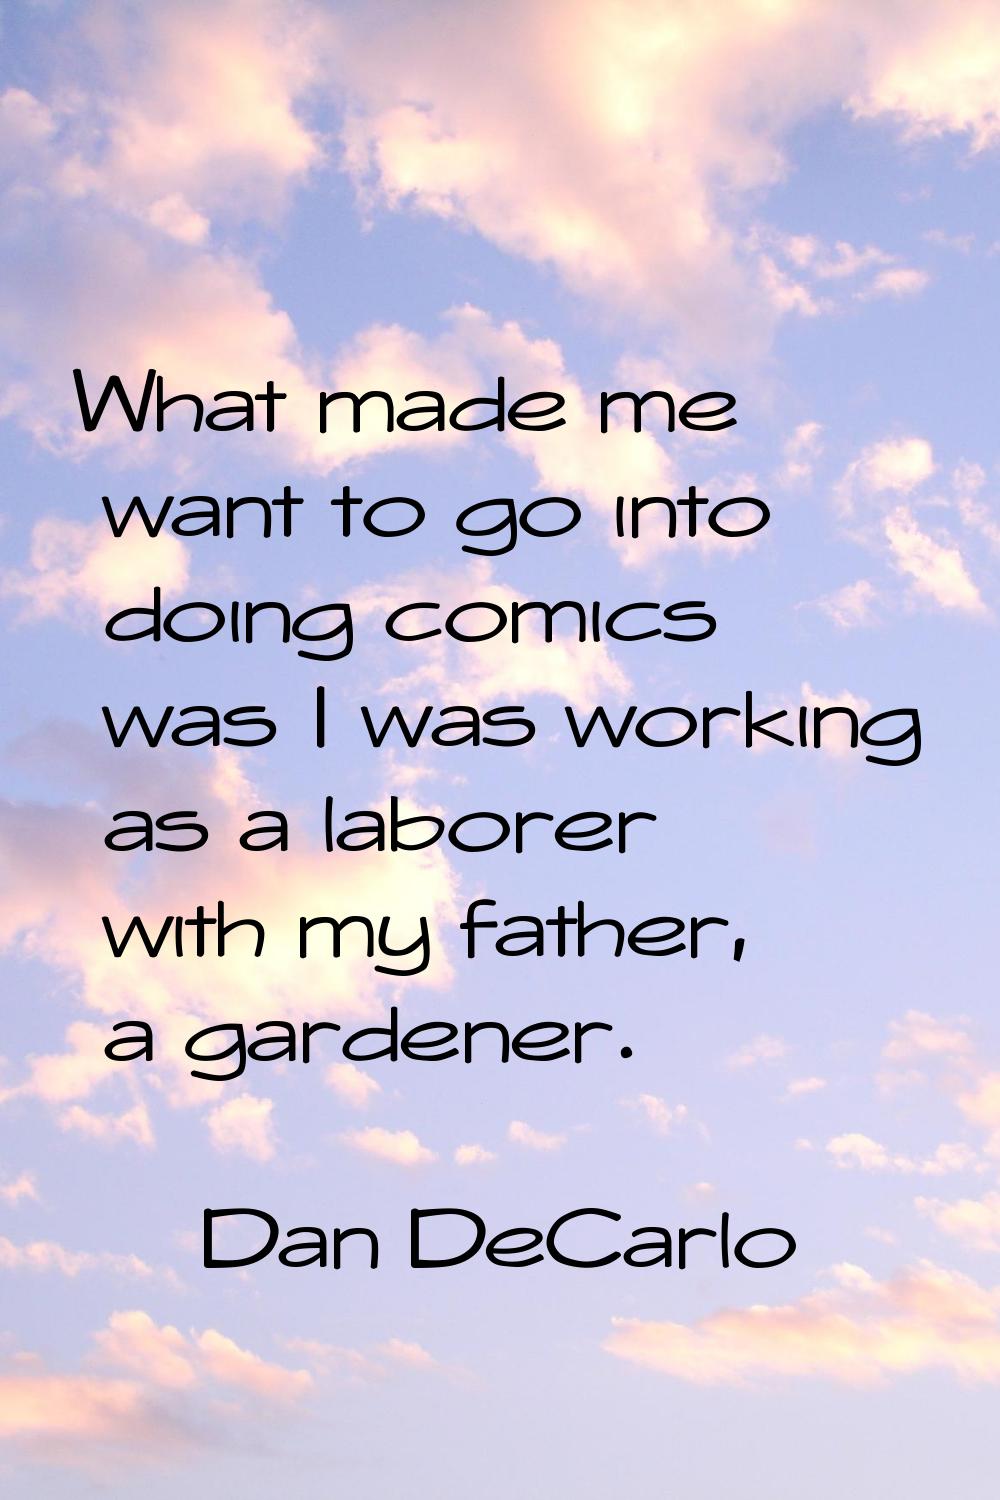 What made me want to go into doing comics was I was working as a laborer with my father, a gardener